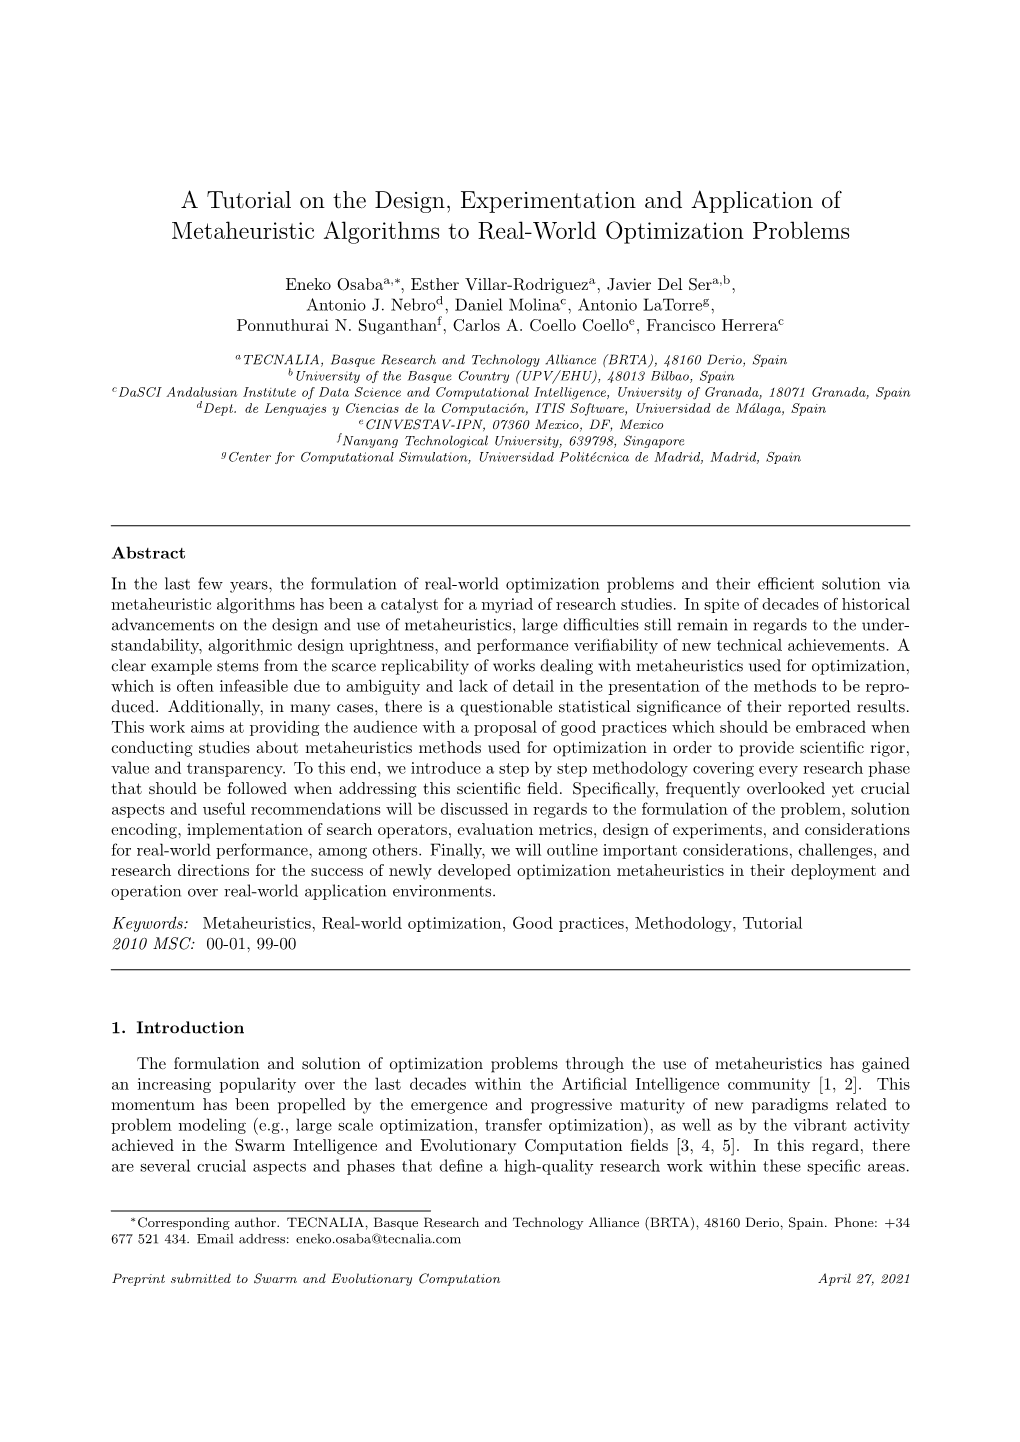 A Tutorial on the Design, Experimentation and Application of Metaheuristic Algorithms to Real-World Optimization Problems